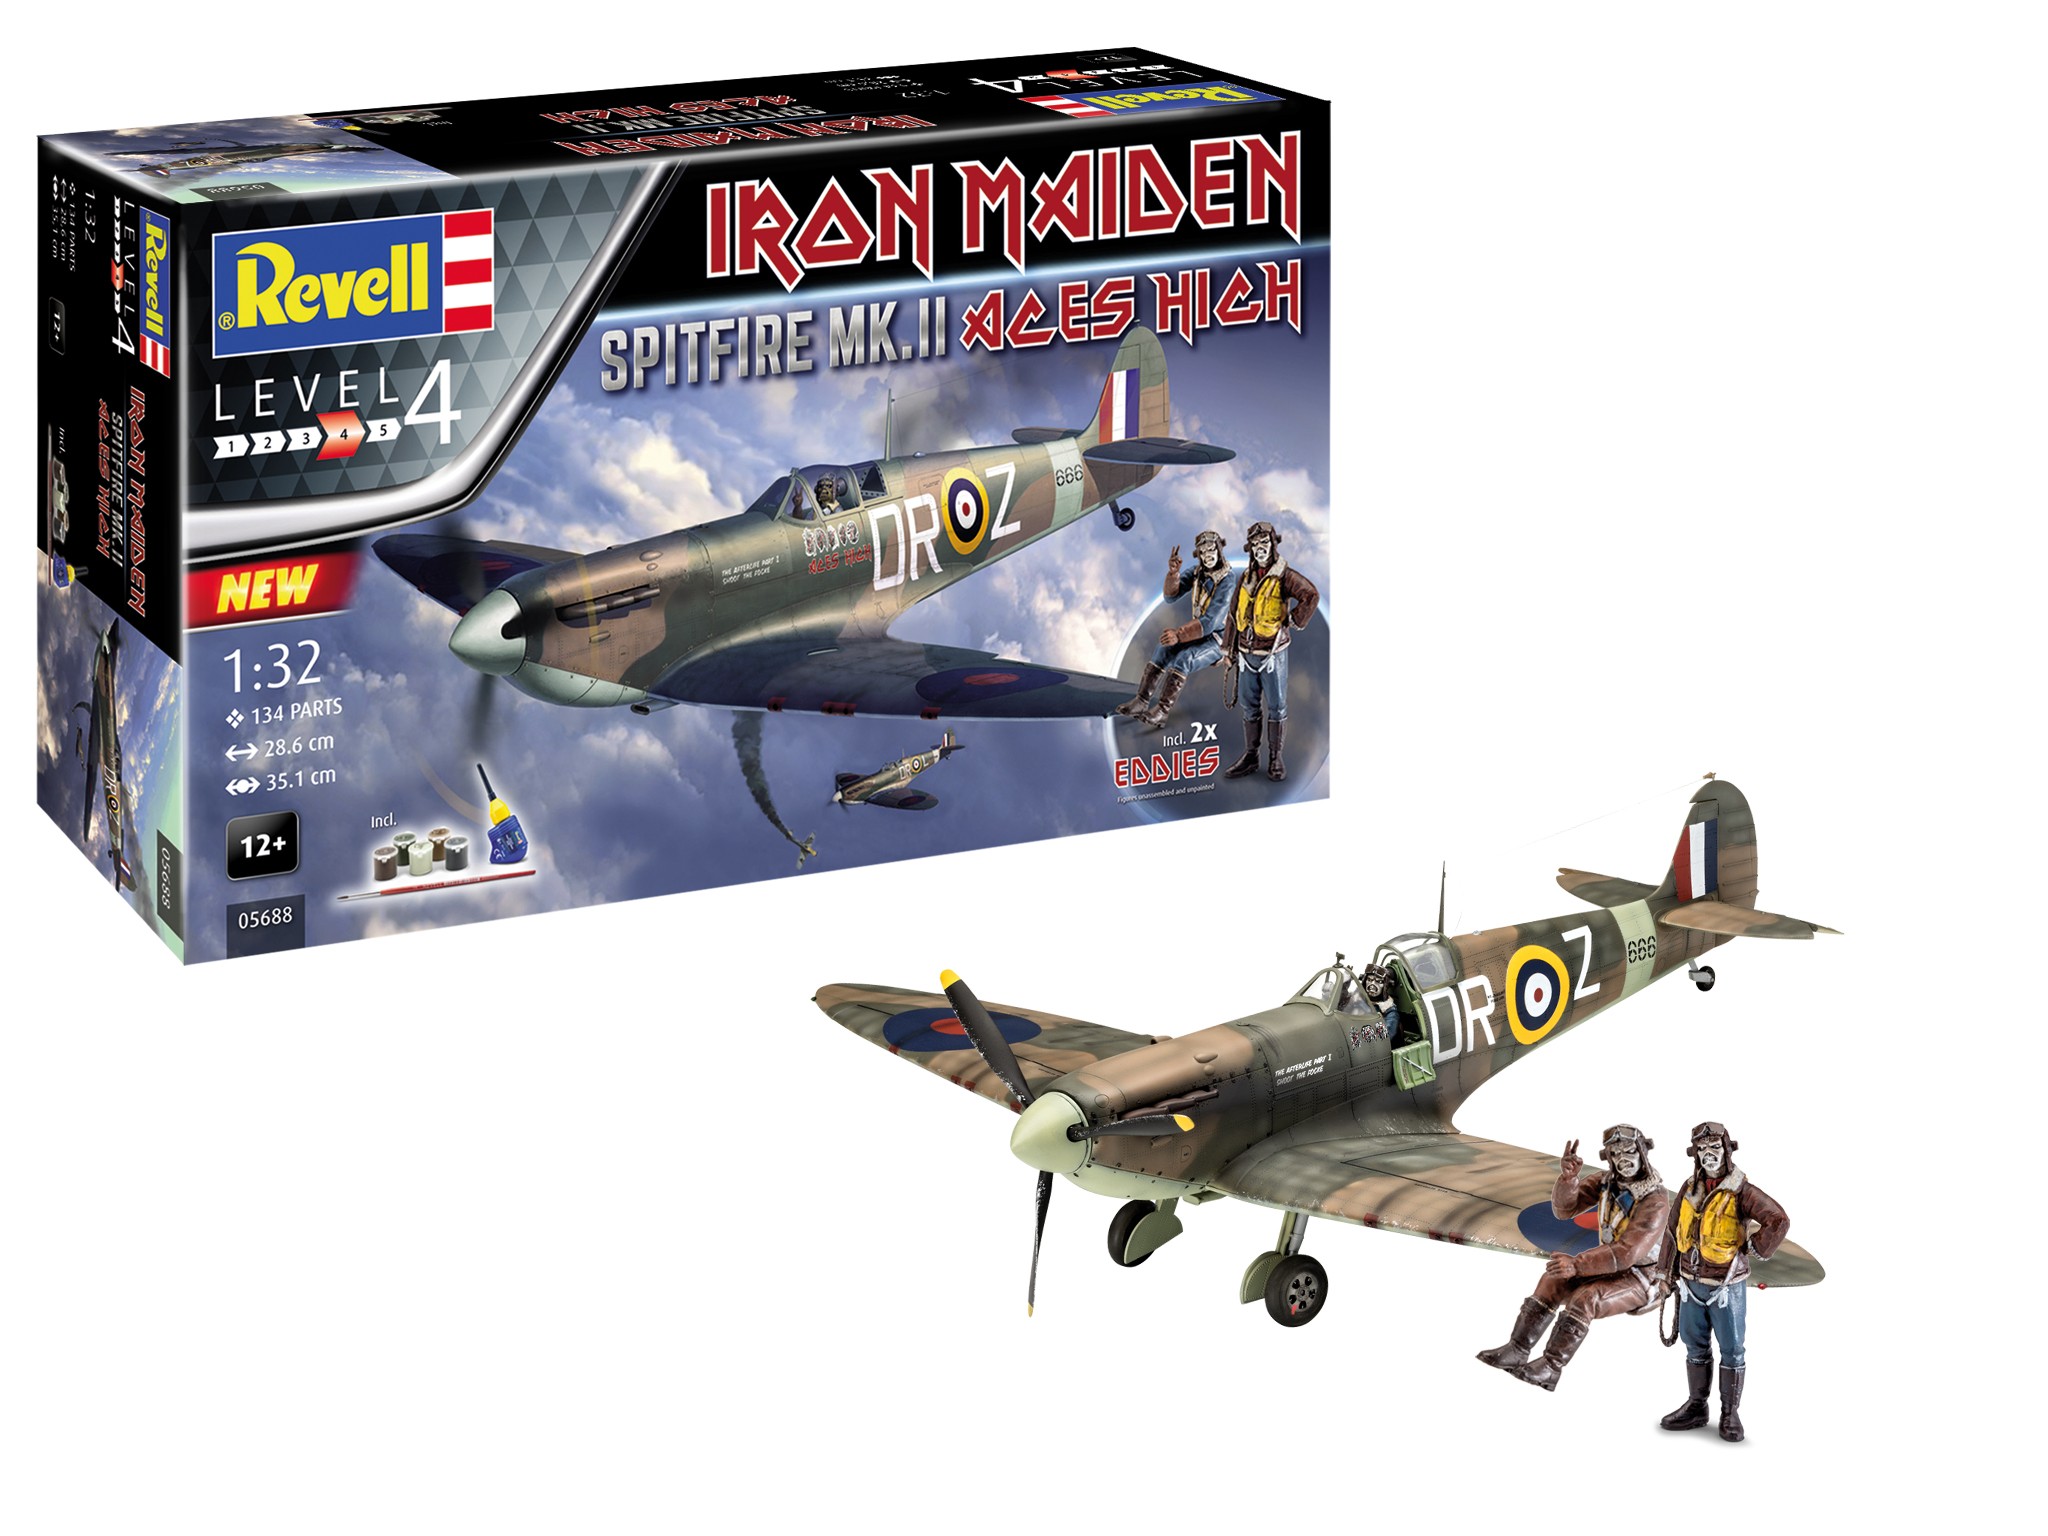 Revell 05688 Spitfire Mk.II "Aces High" Iron Maiden  1:32 " GIFT-SET "